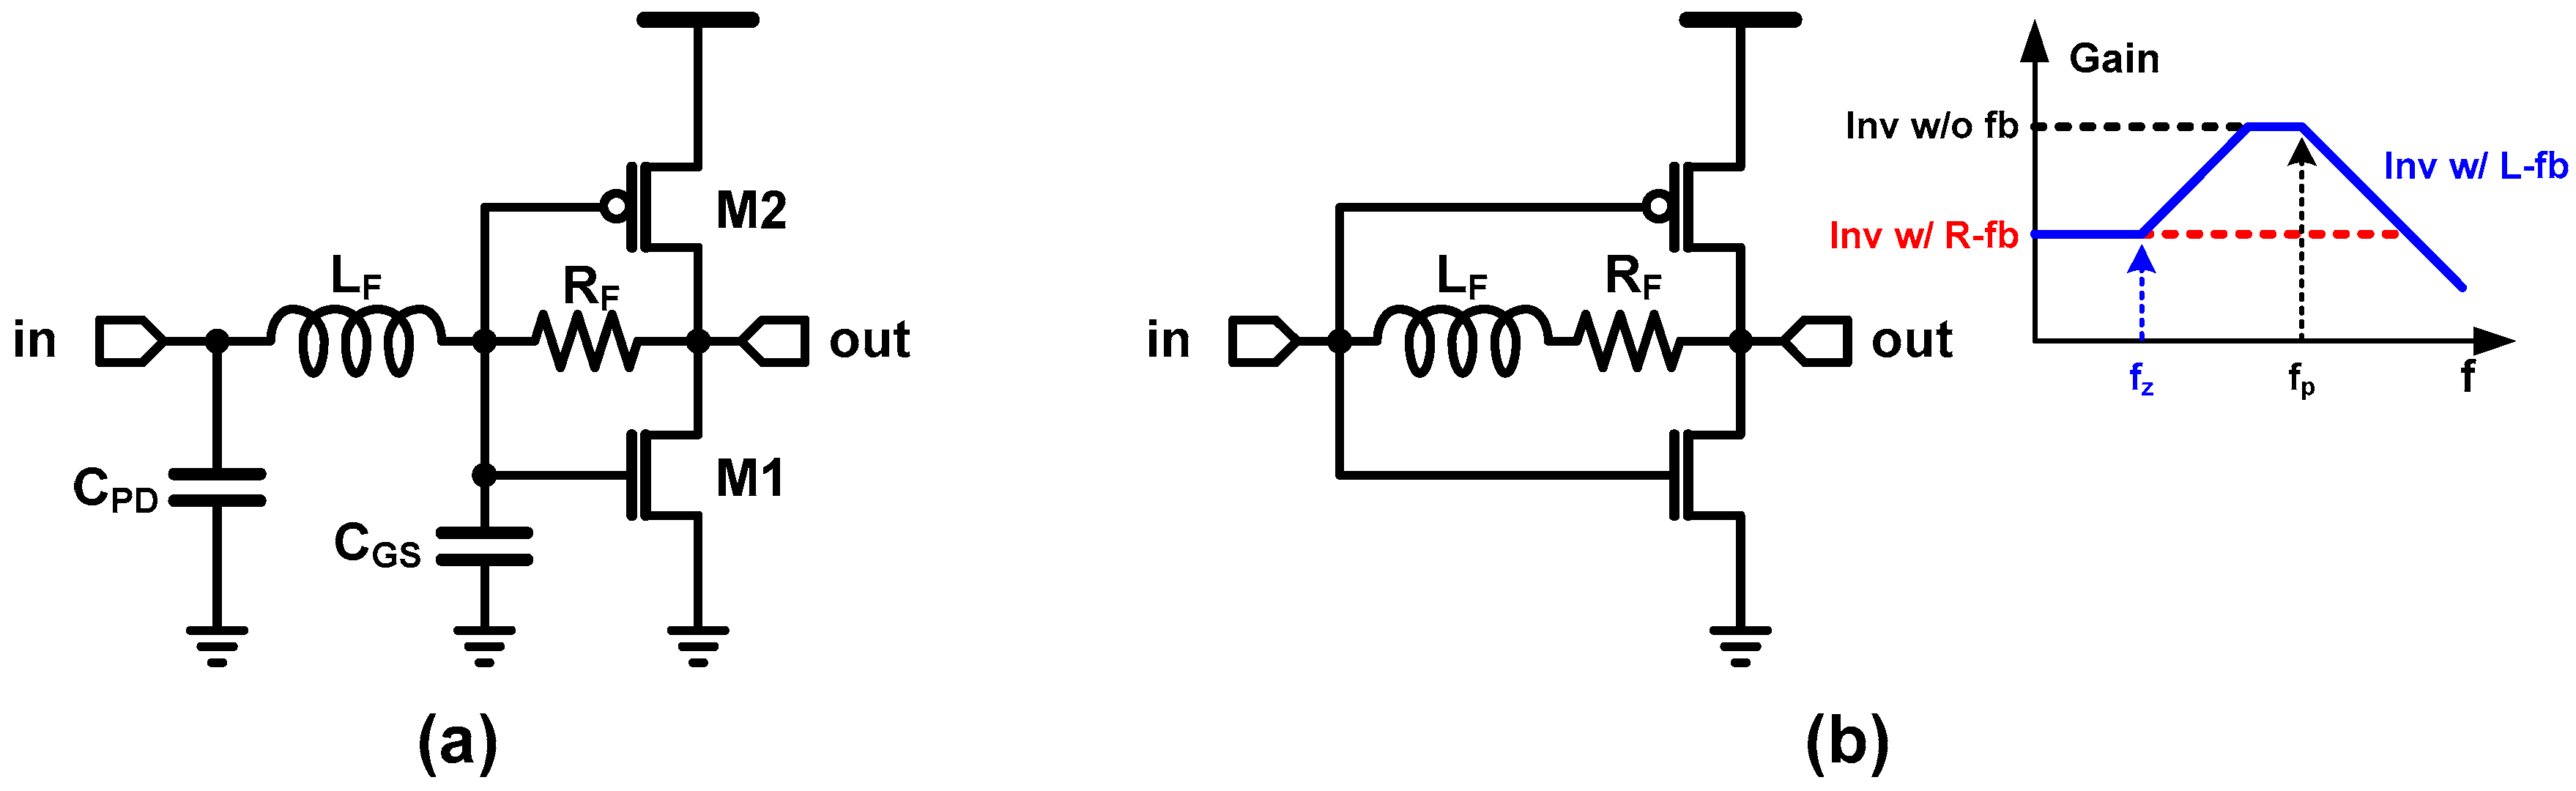 JLPEA | Free Full-Text | CMOS Inverter as Analog Circuit: An Overview